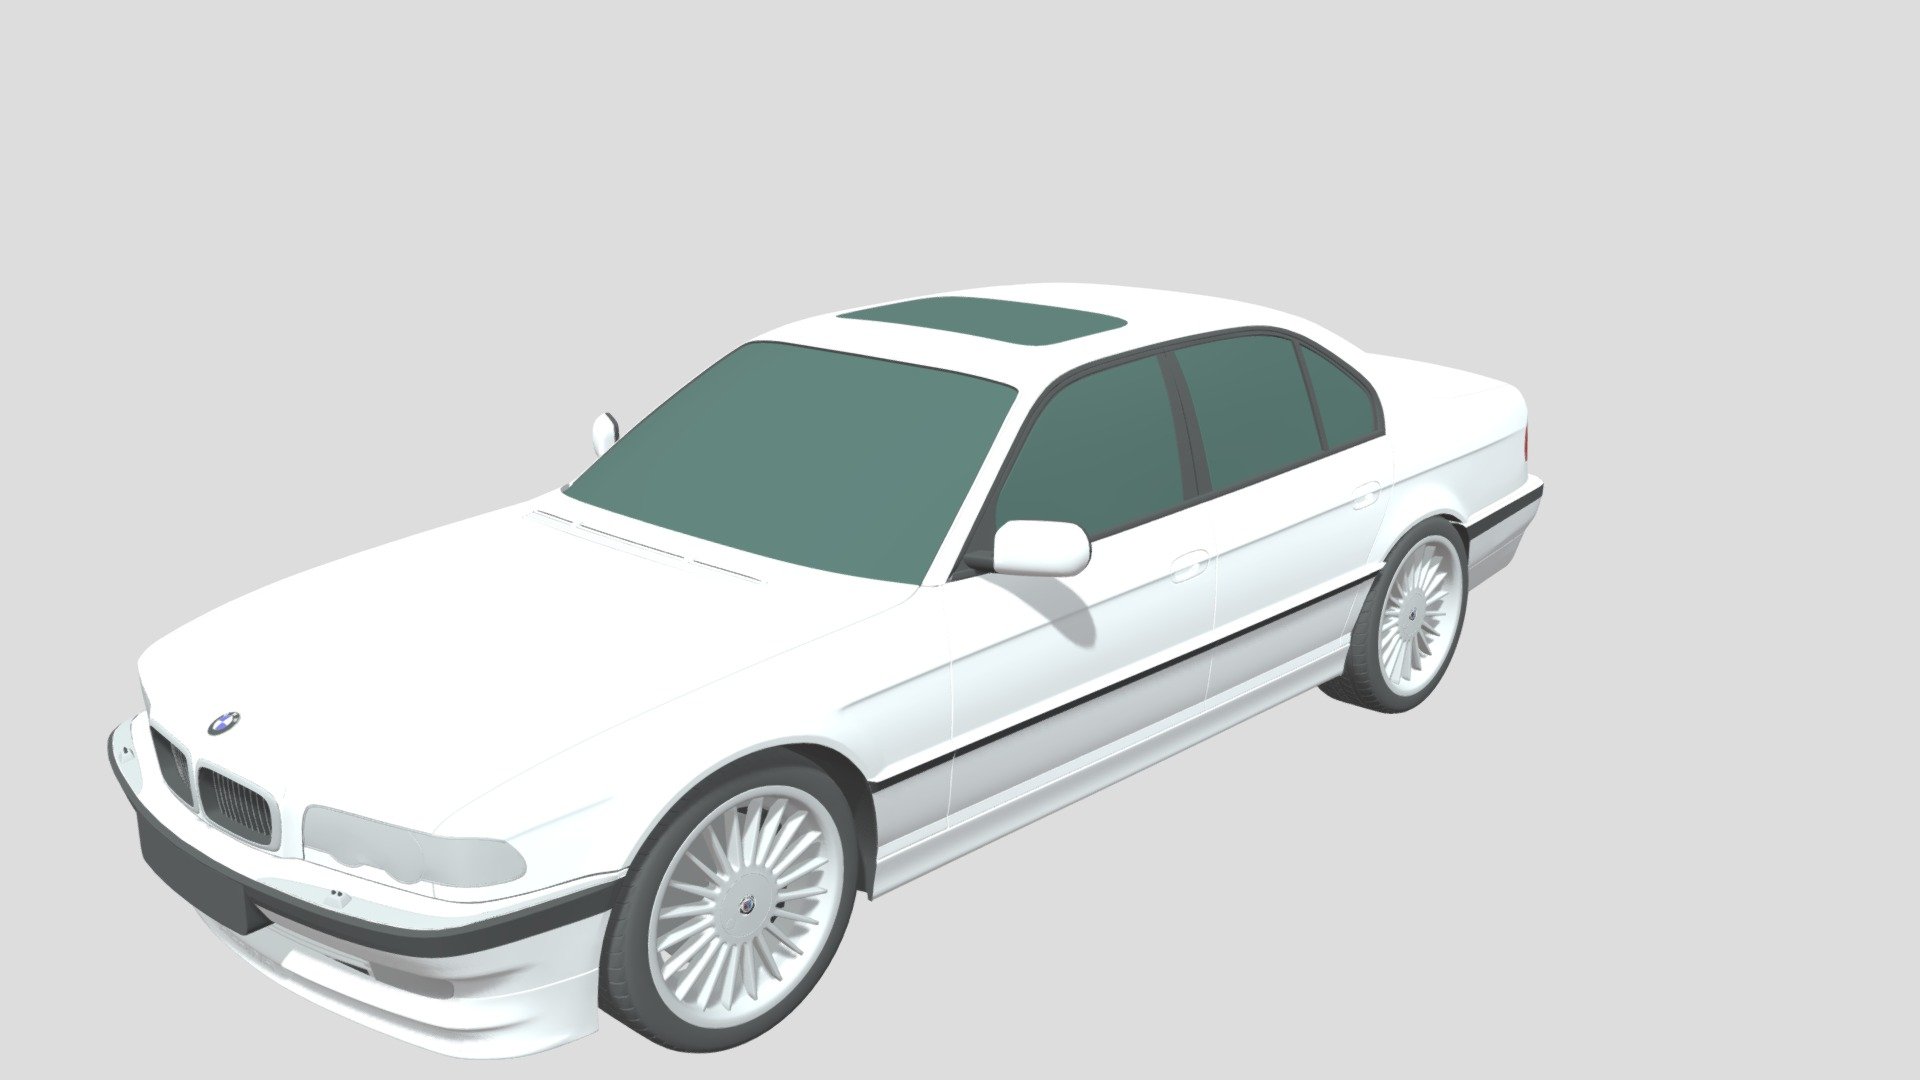 Introducing our stunning photorealistic 3D model of the BMW 7-Series B12 Alpina (1998) car, a true masterpiece of digital craftsmanship that will elevate your projects to the next level. This meticulously crafted model captures every curve, detail, and essence of a real BMW 7-Series B12 Alpina (1998) car, providing you with unparalleled realism and versatility for your creative endeavors.

Our photorealistic 3D model of the BMW 7-Series B12 Alpina (1998) car is a testament to precision and attention to detail. Each contour, from the sleek body lines to the intricacies of the headlights and tail lights, has been painstakingly recreated to mirror the elegance and realism of a genuine BMW 7-Series B12 Alpina (1998) automobile. Whether you're an automotive designer, a video game developer, or a filmmaker, this 3D model will bring your visions to life with exceptional fidelity 3d model